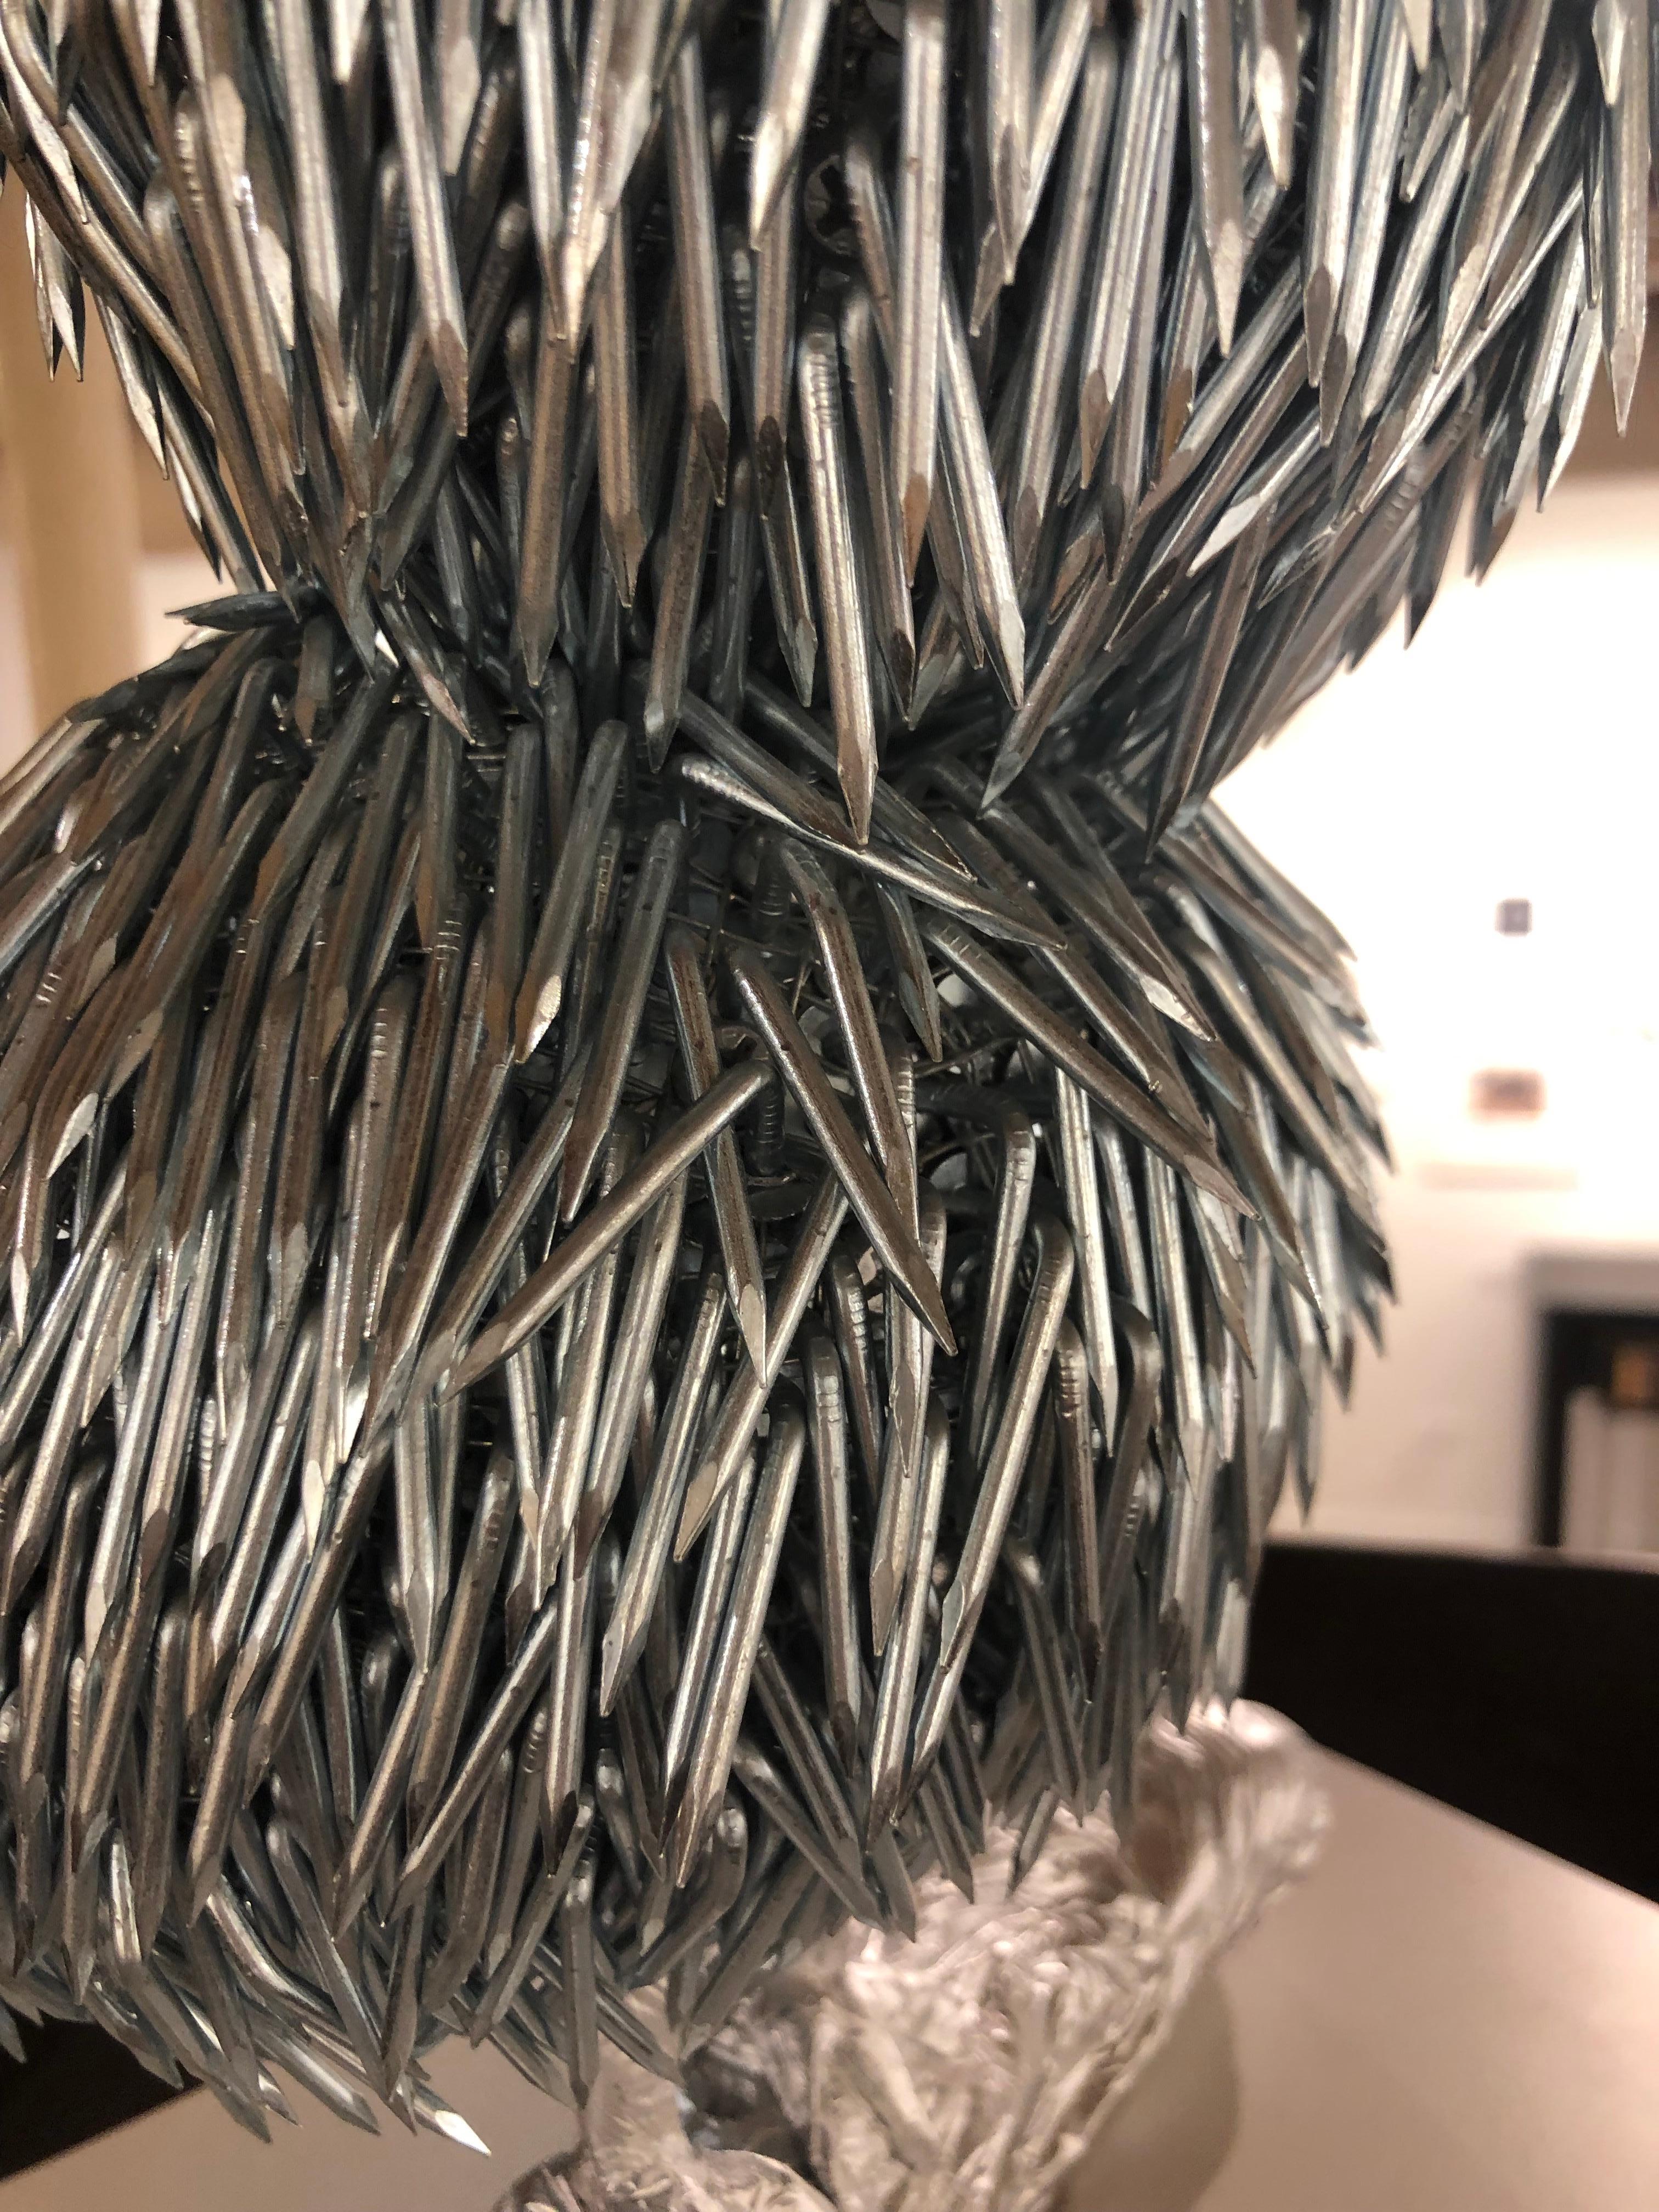 Yaku, Owl Like Sculpture Created from Galvanized Construction Nails 5